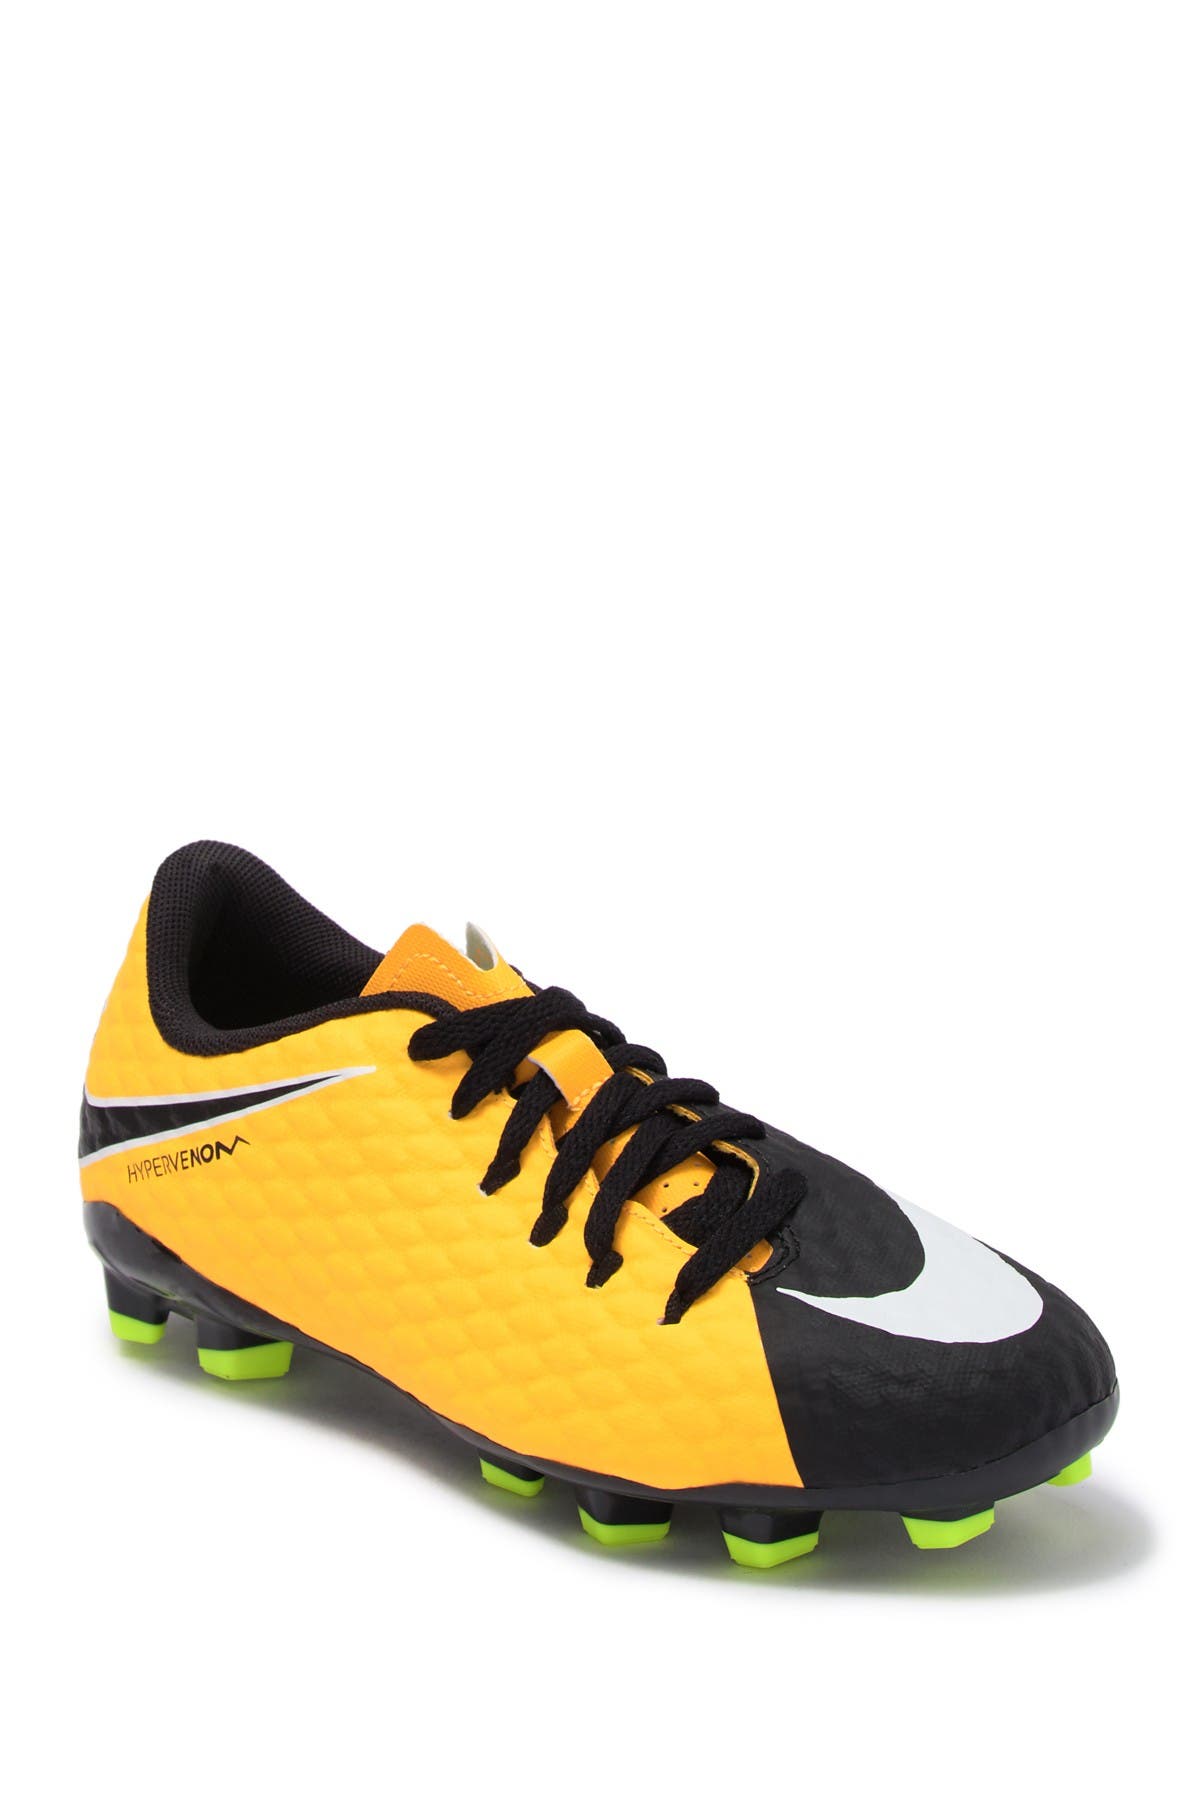 nordstrom soccer cleats